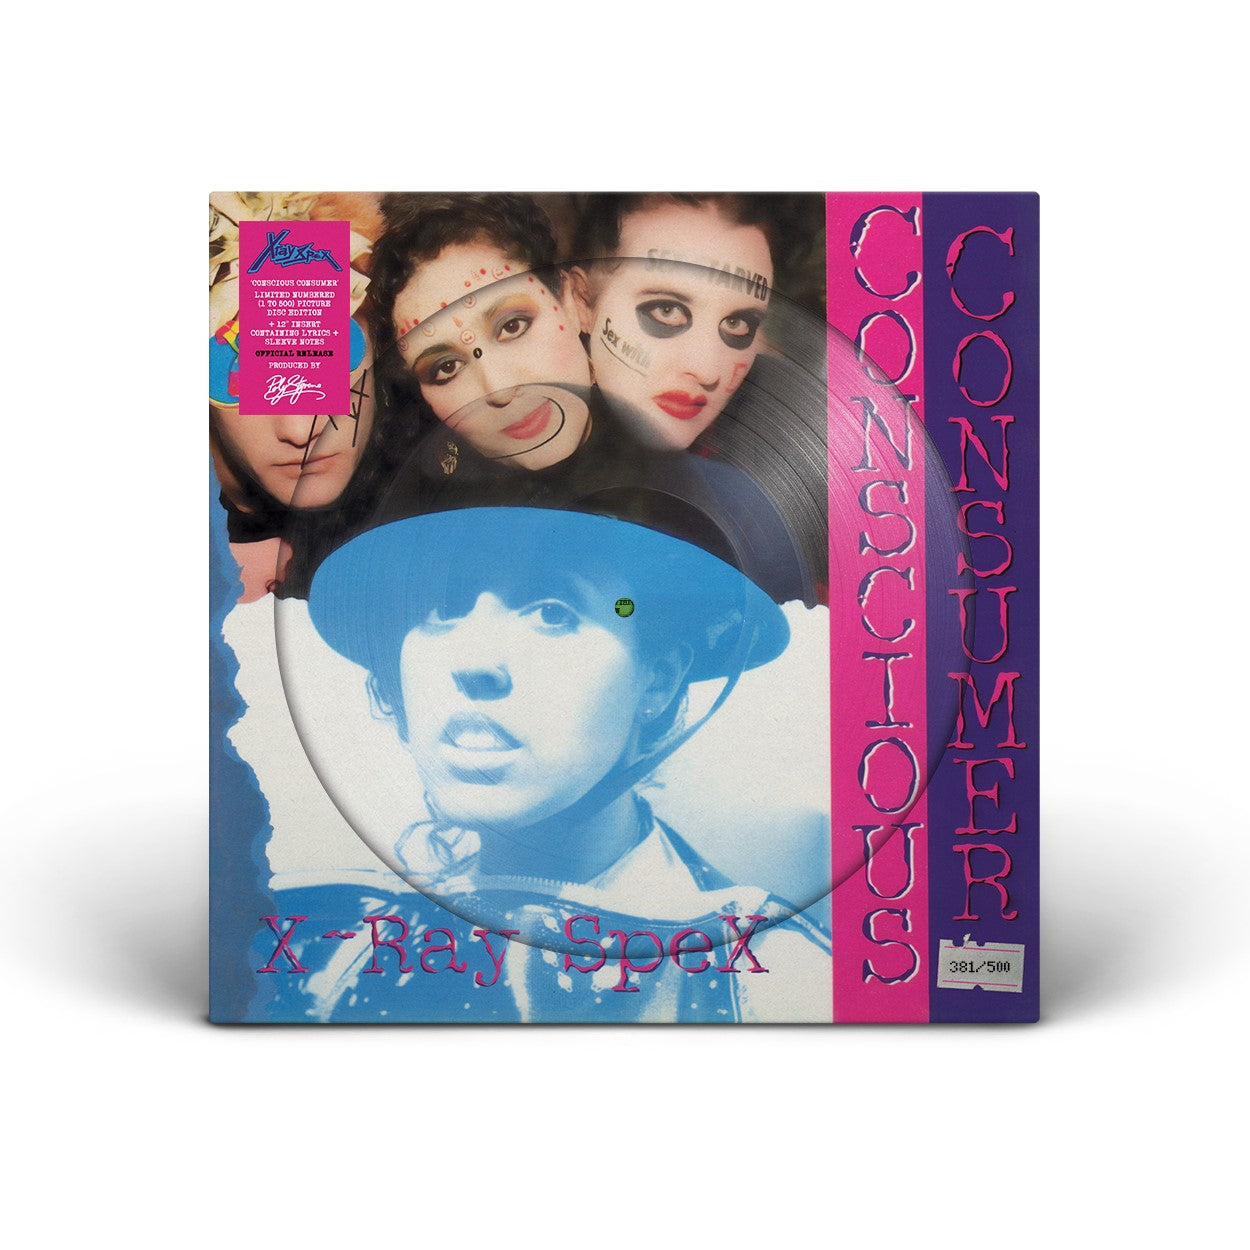 X-RAY SPEX - Conscious Consumer (Picture Disc) - 1 LP - Picture Disc  [RSD 2024]